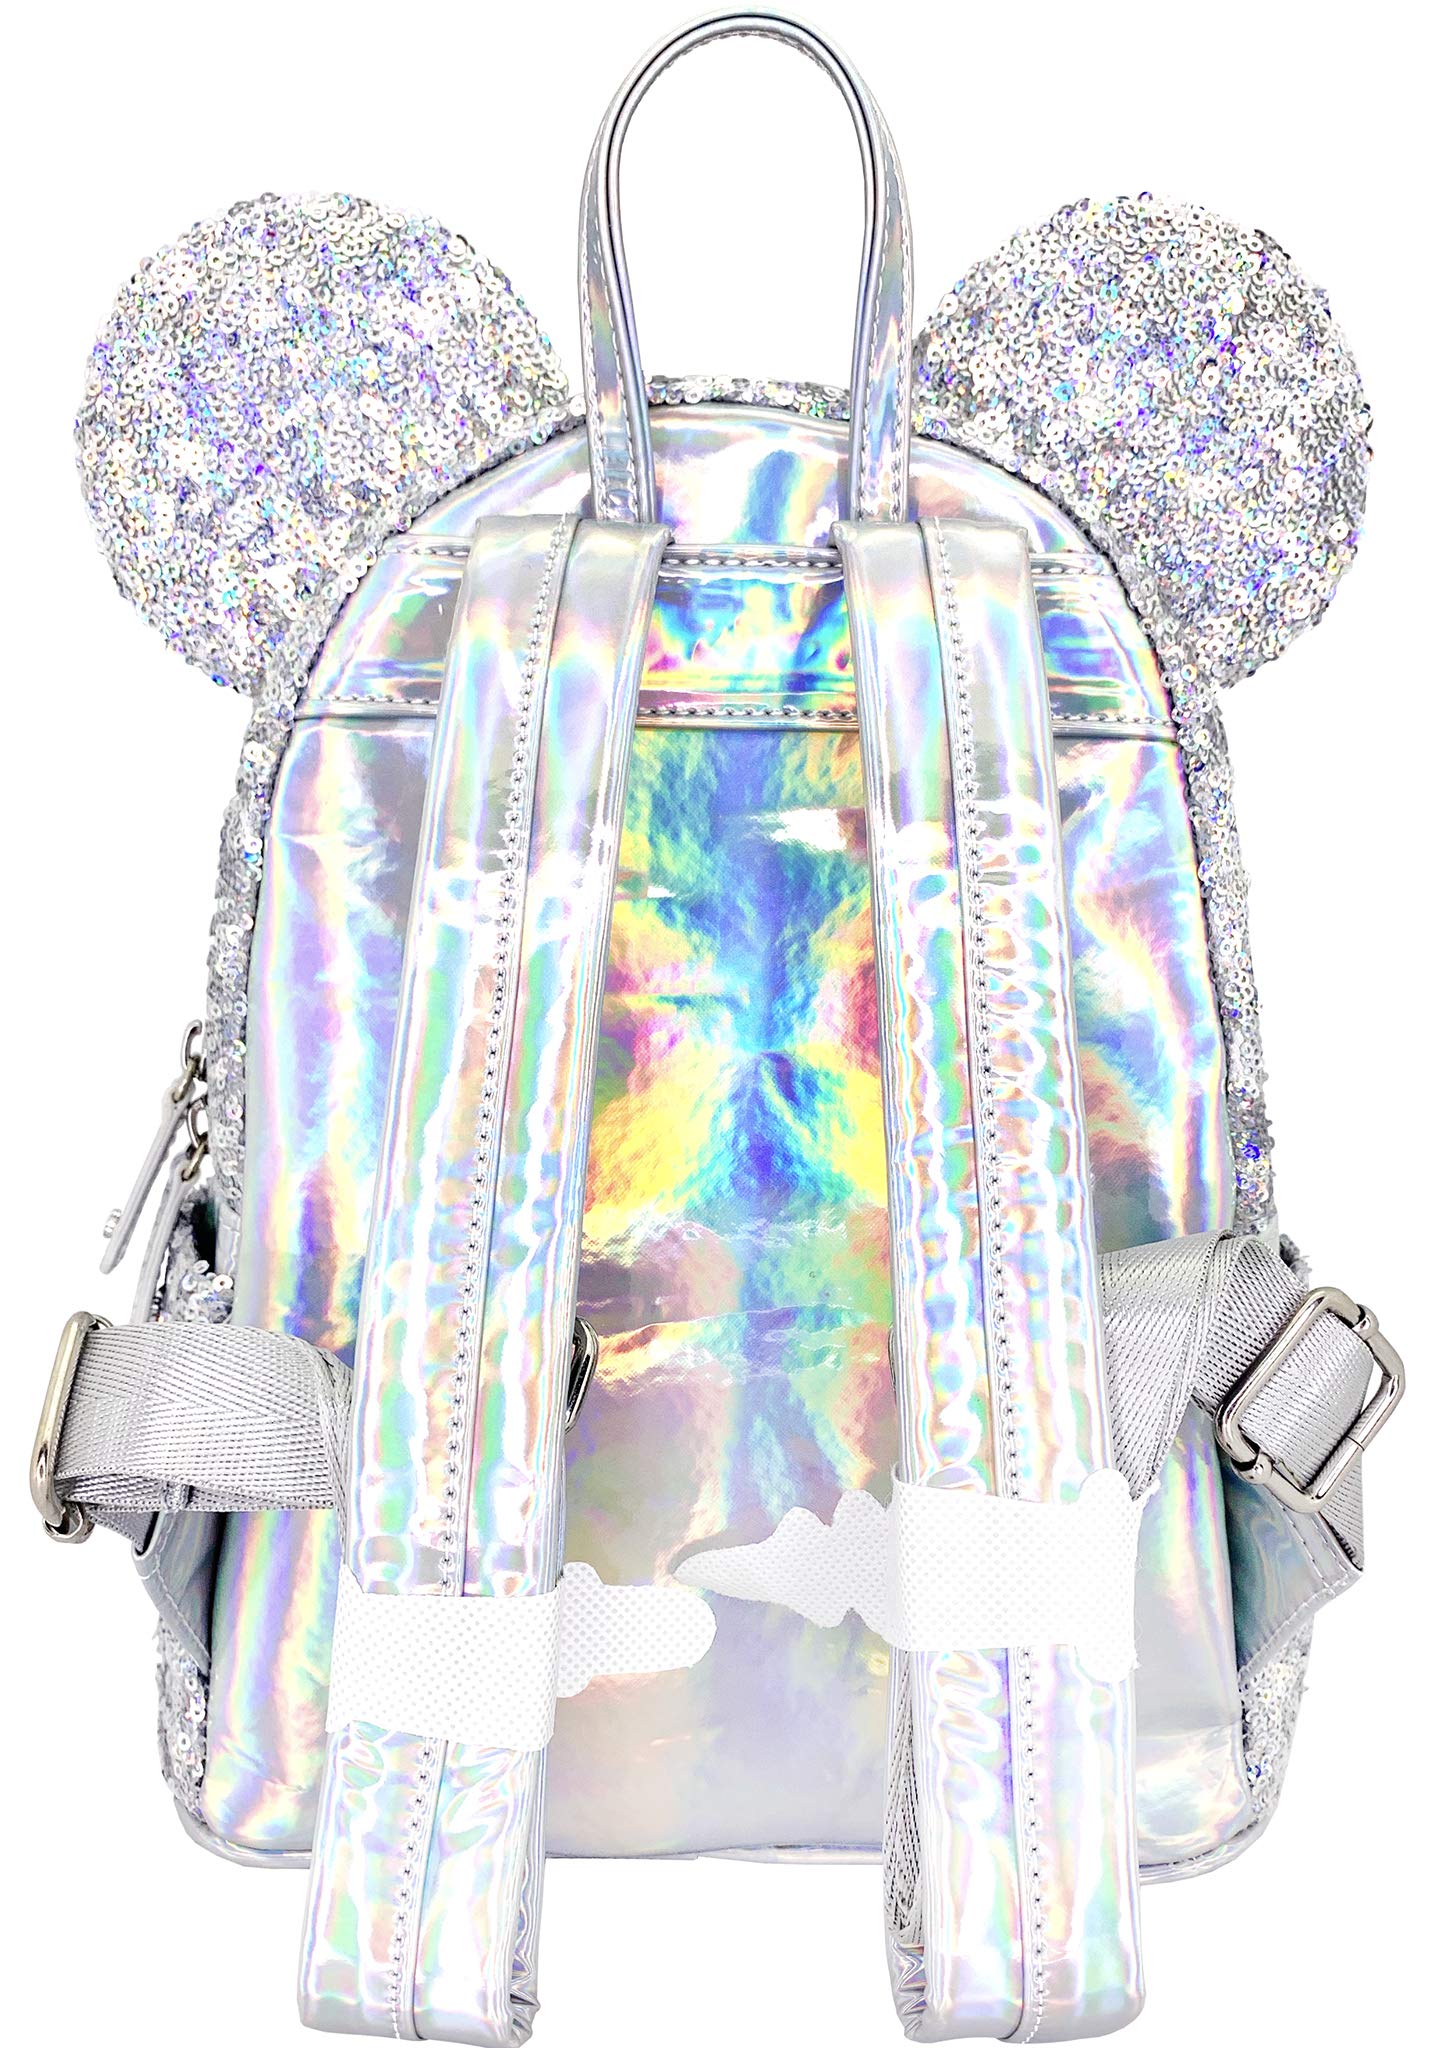 Loungefly X LASR Exclusive Disney Holographic Sequin Minnie Mini Backpack